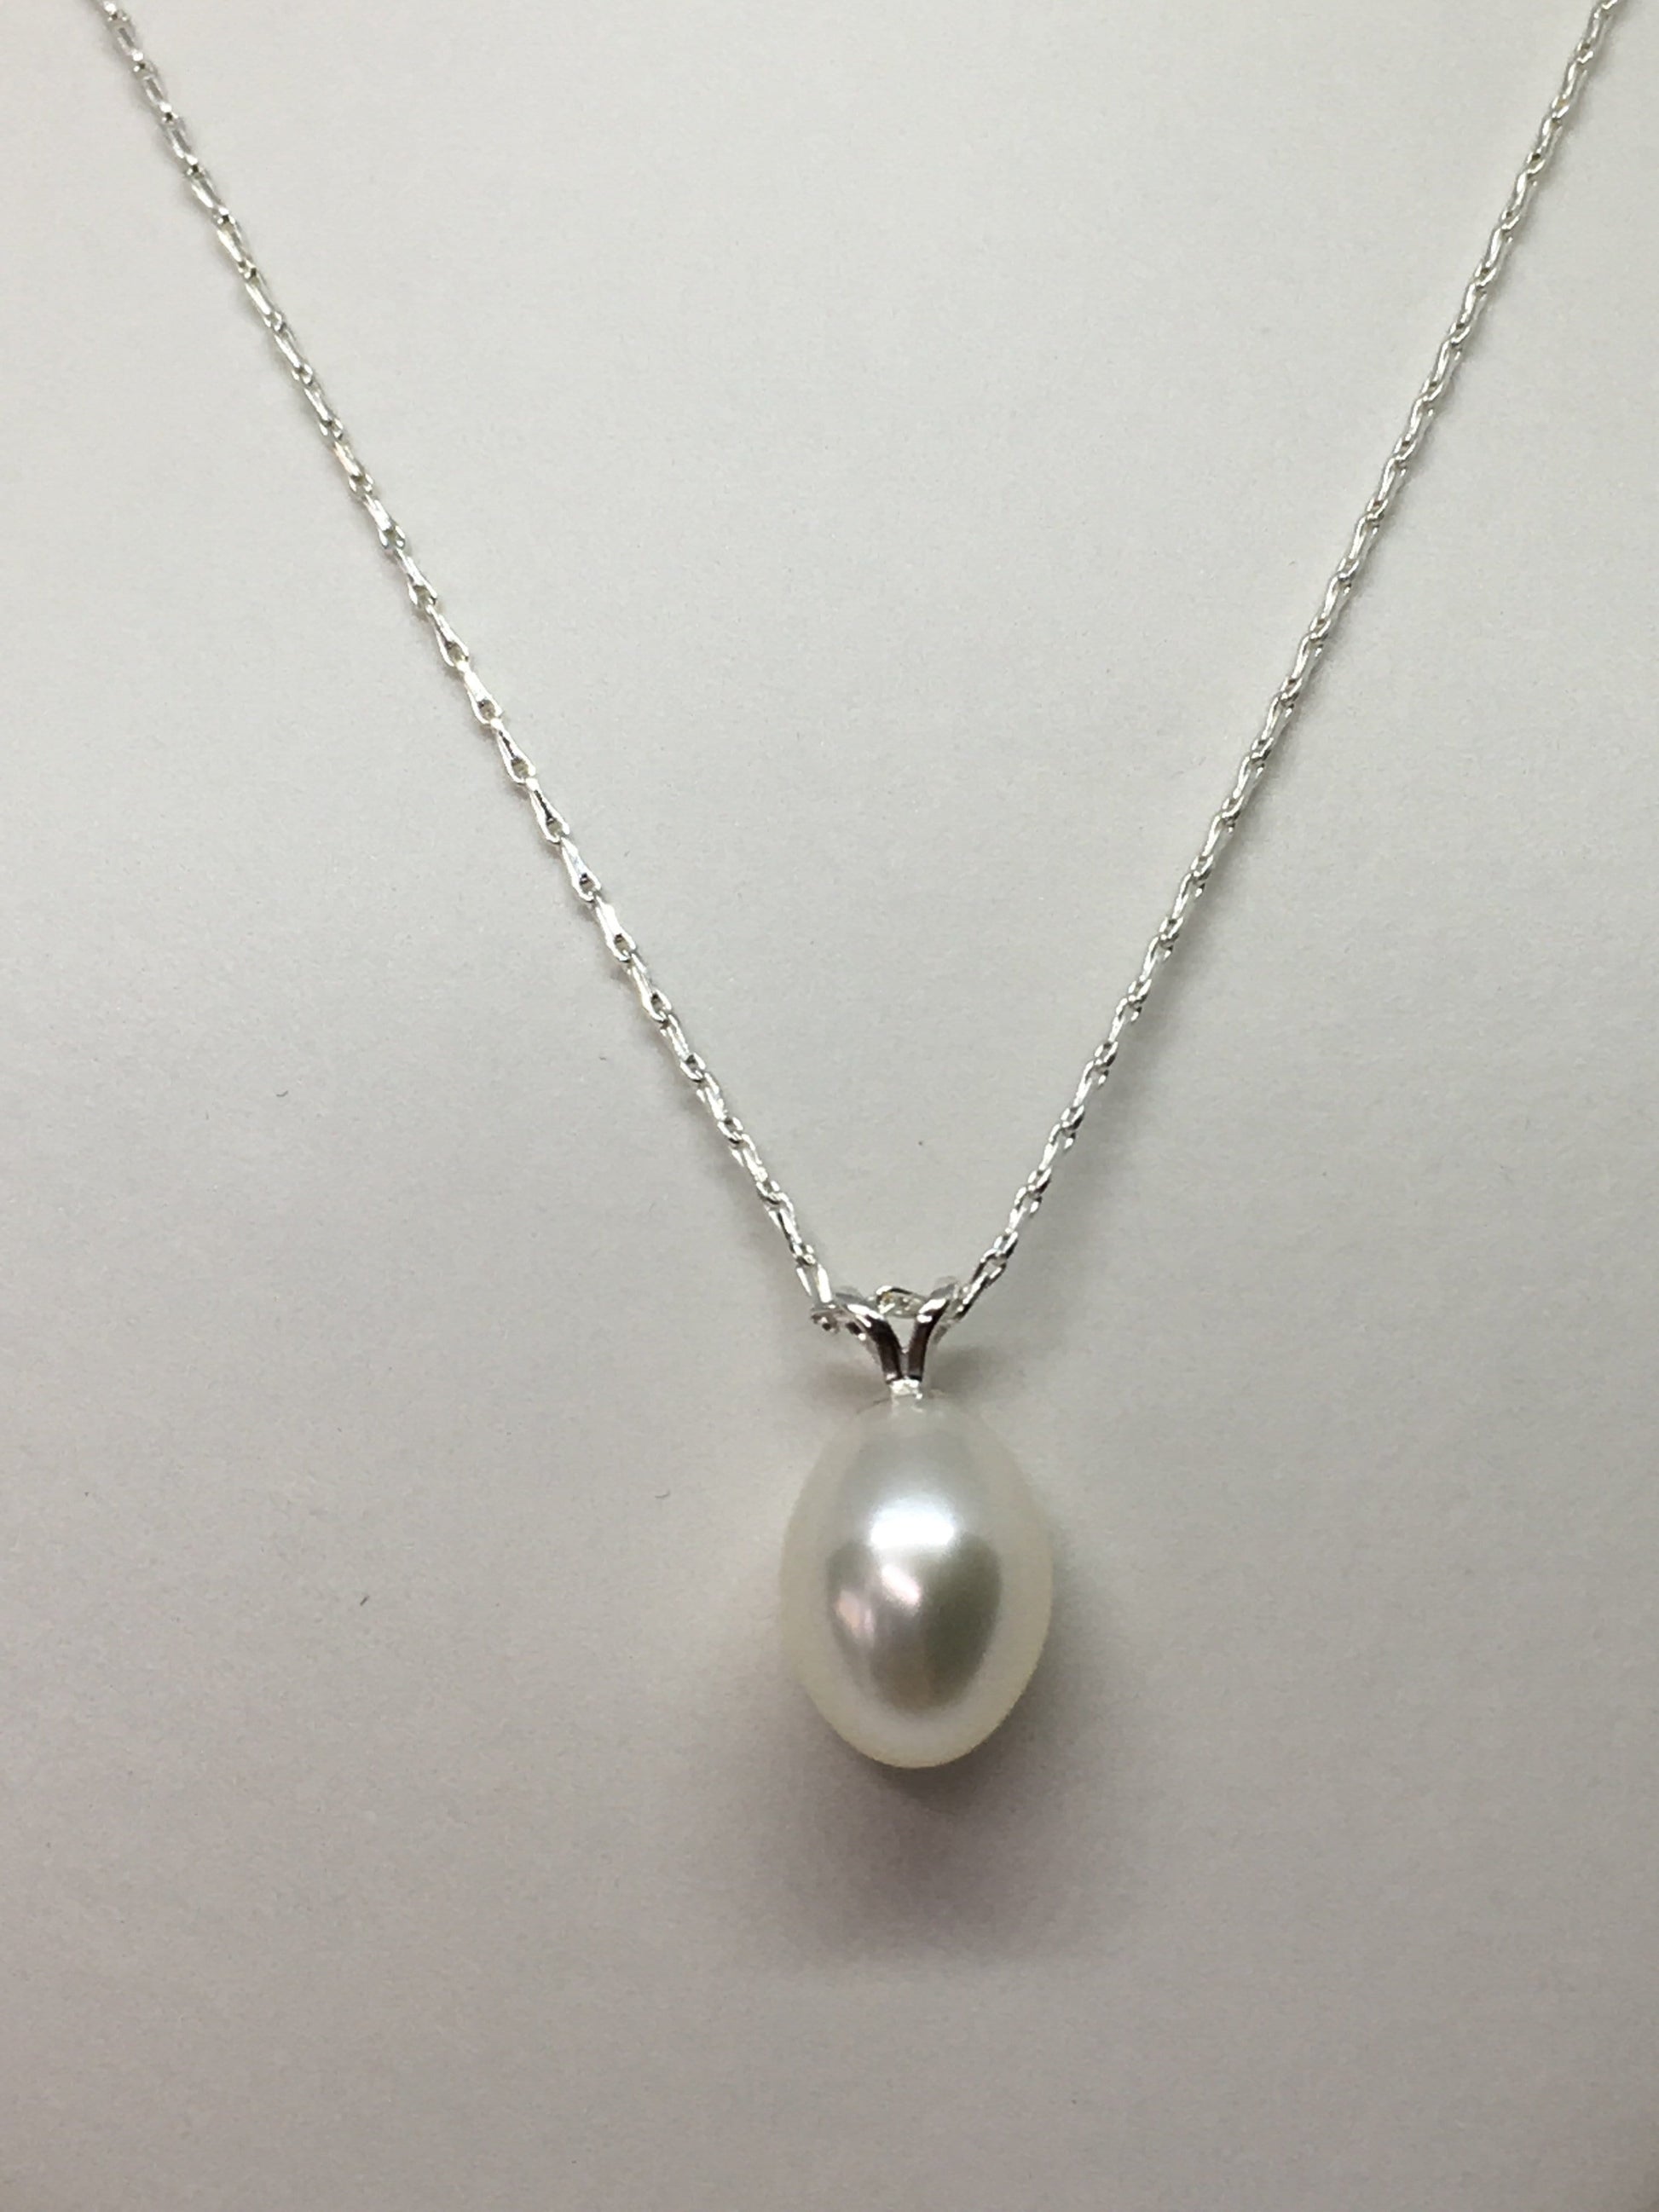 Necklace Sterling Silver And Cultured Pearl Necklace Jewelz Galore Cultured Pearl Necklace | Jewelz Galore | Jewellery